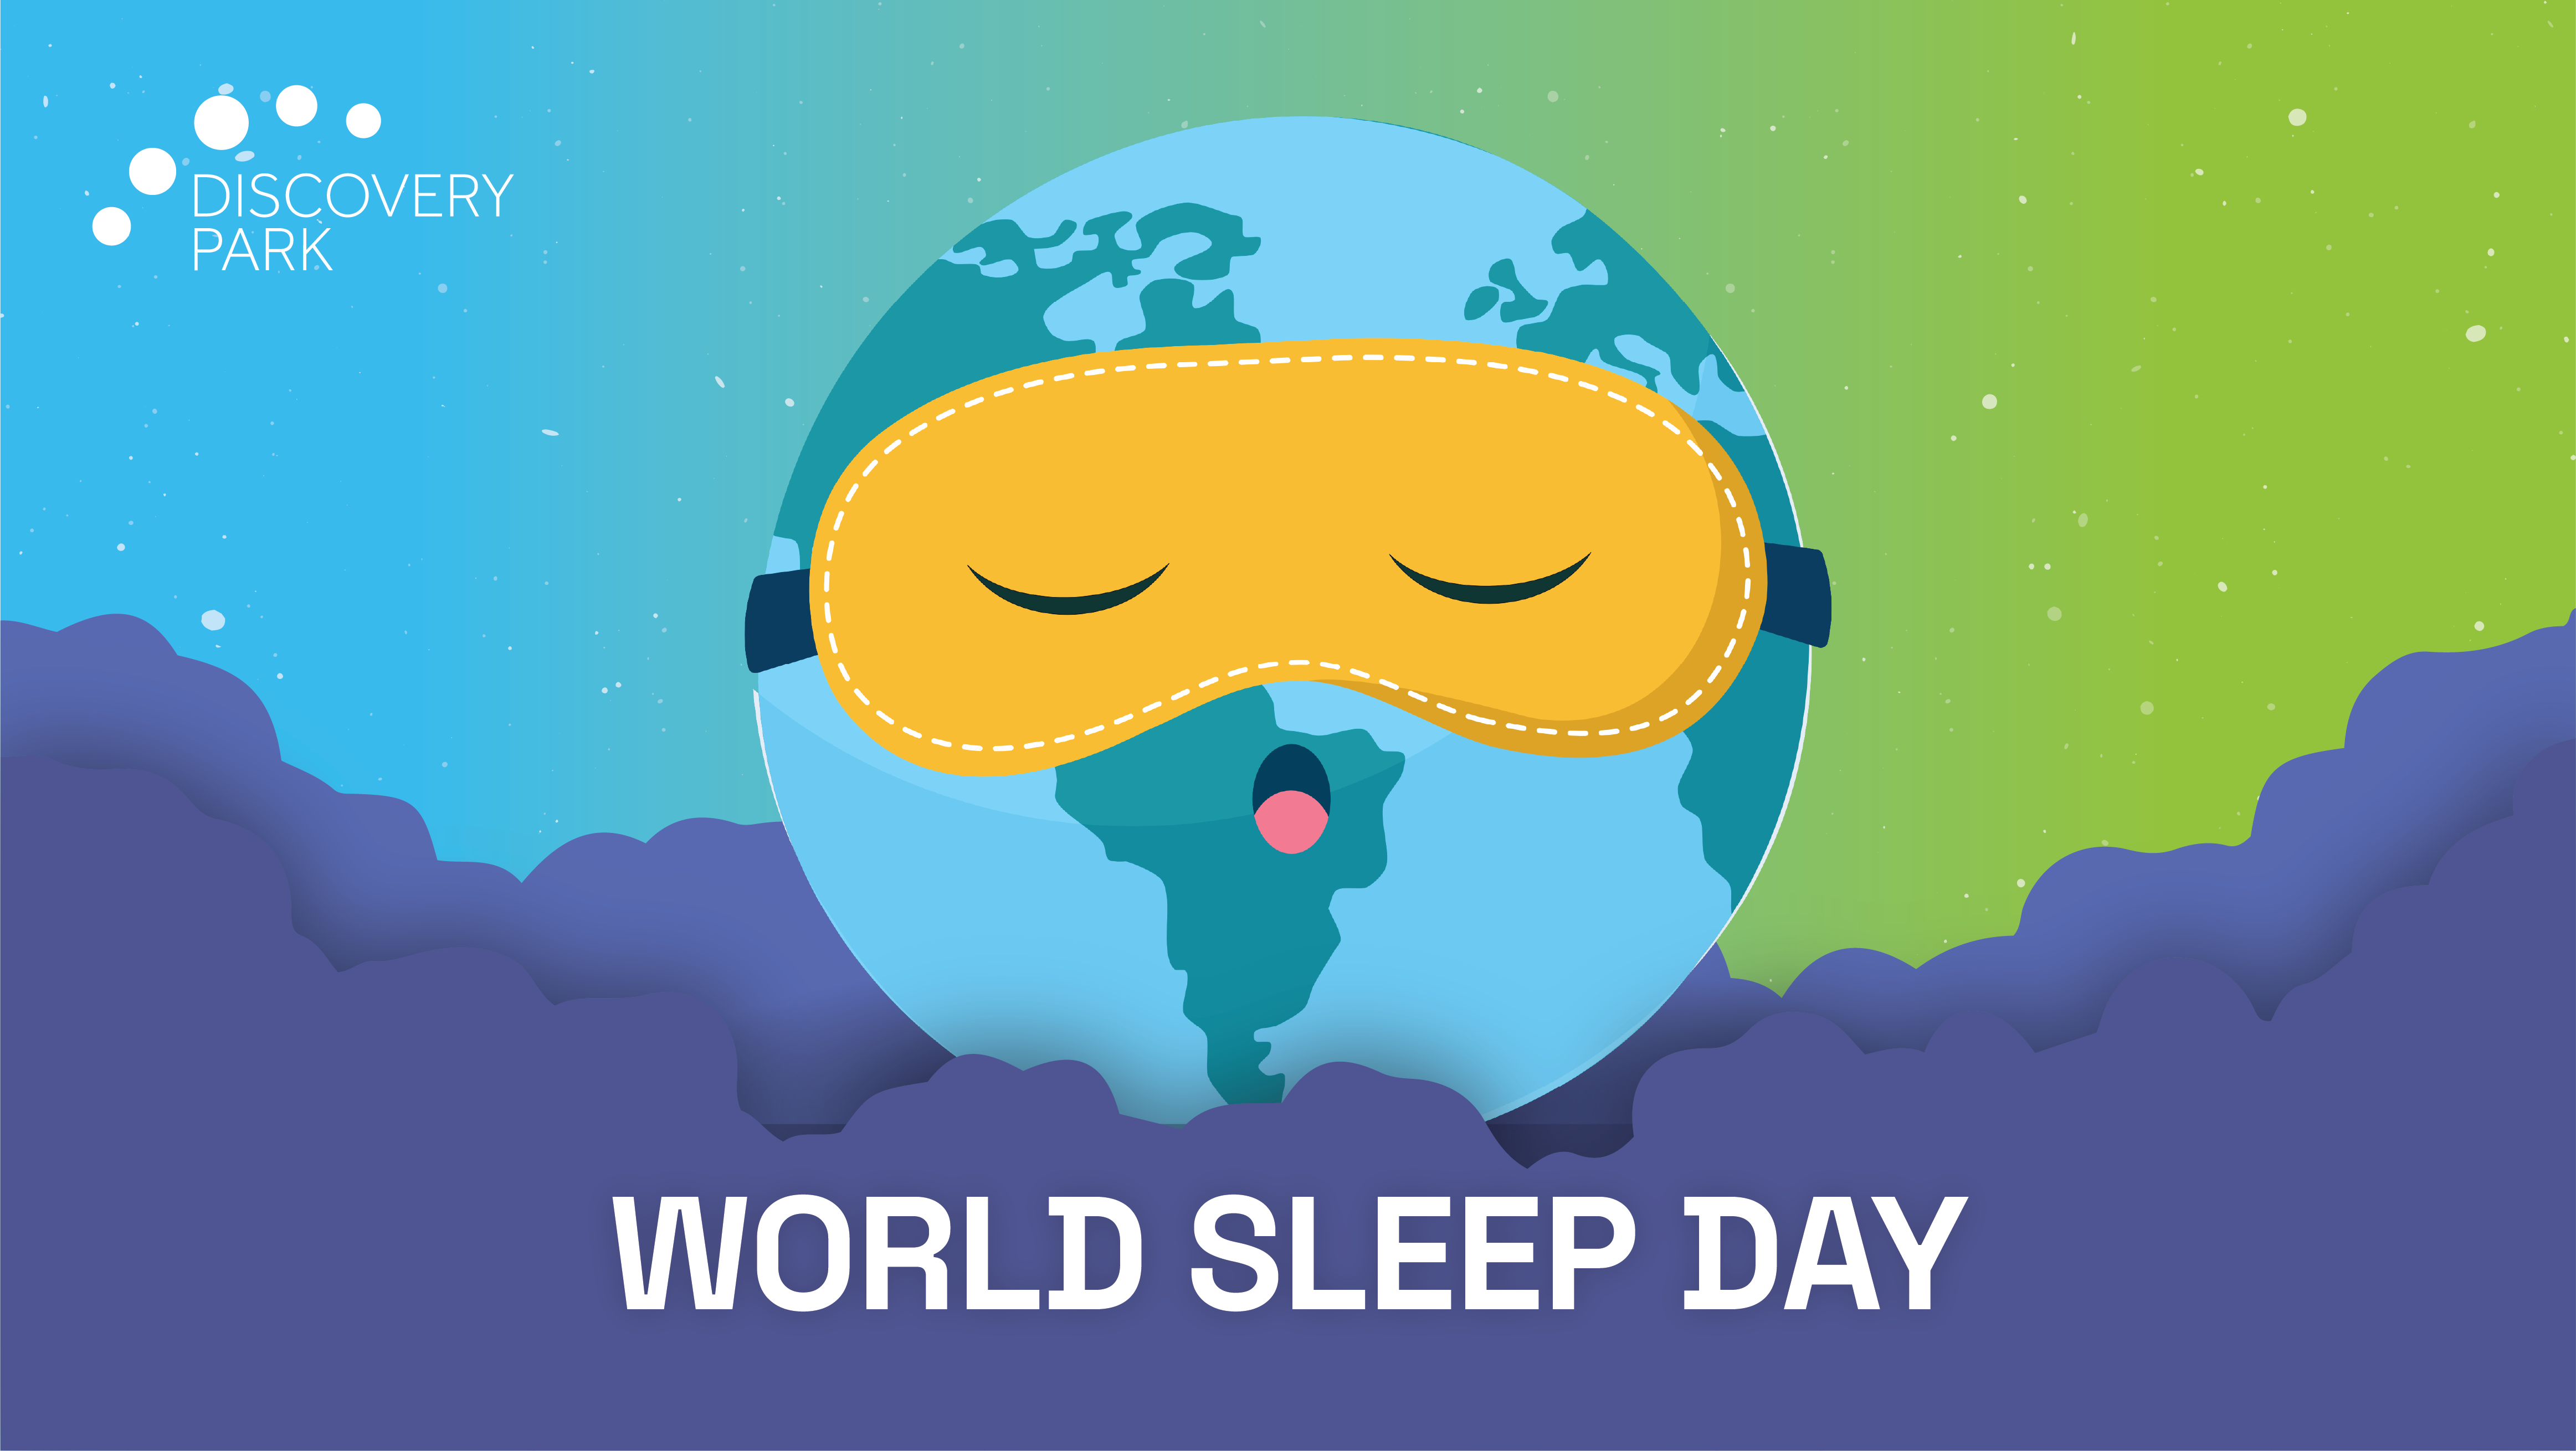 World Sleep Day is Here and It’s Time to Think About Our Own Sleep